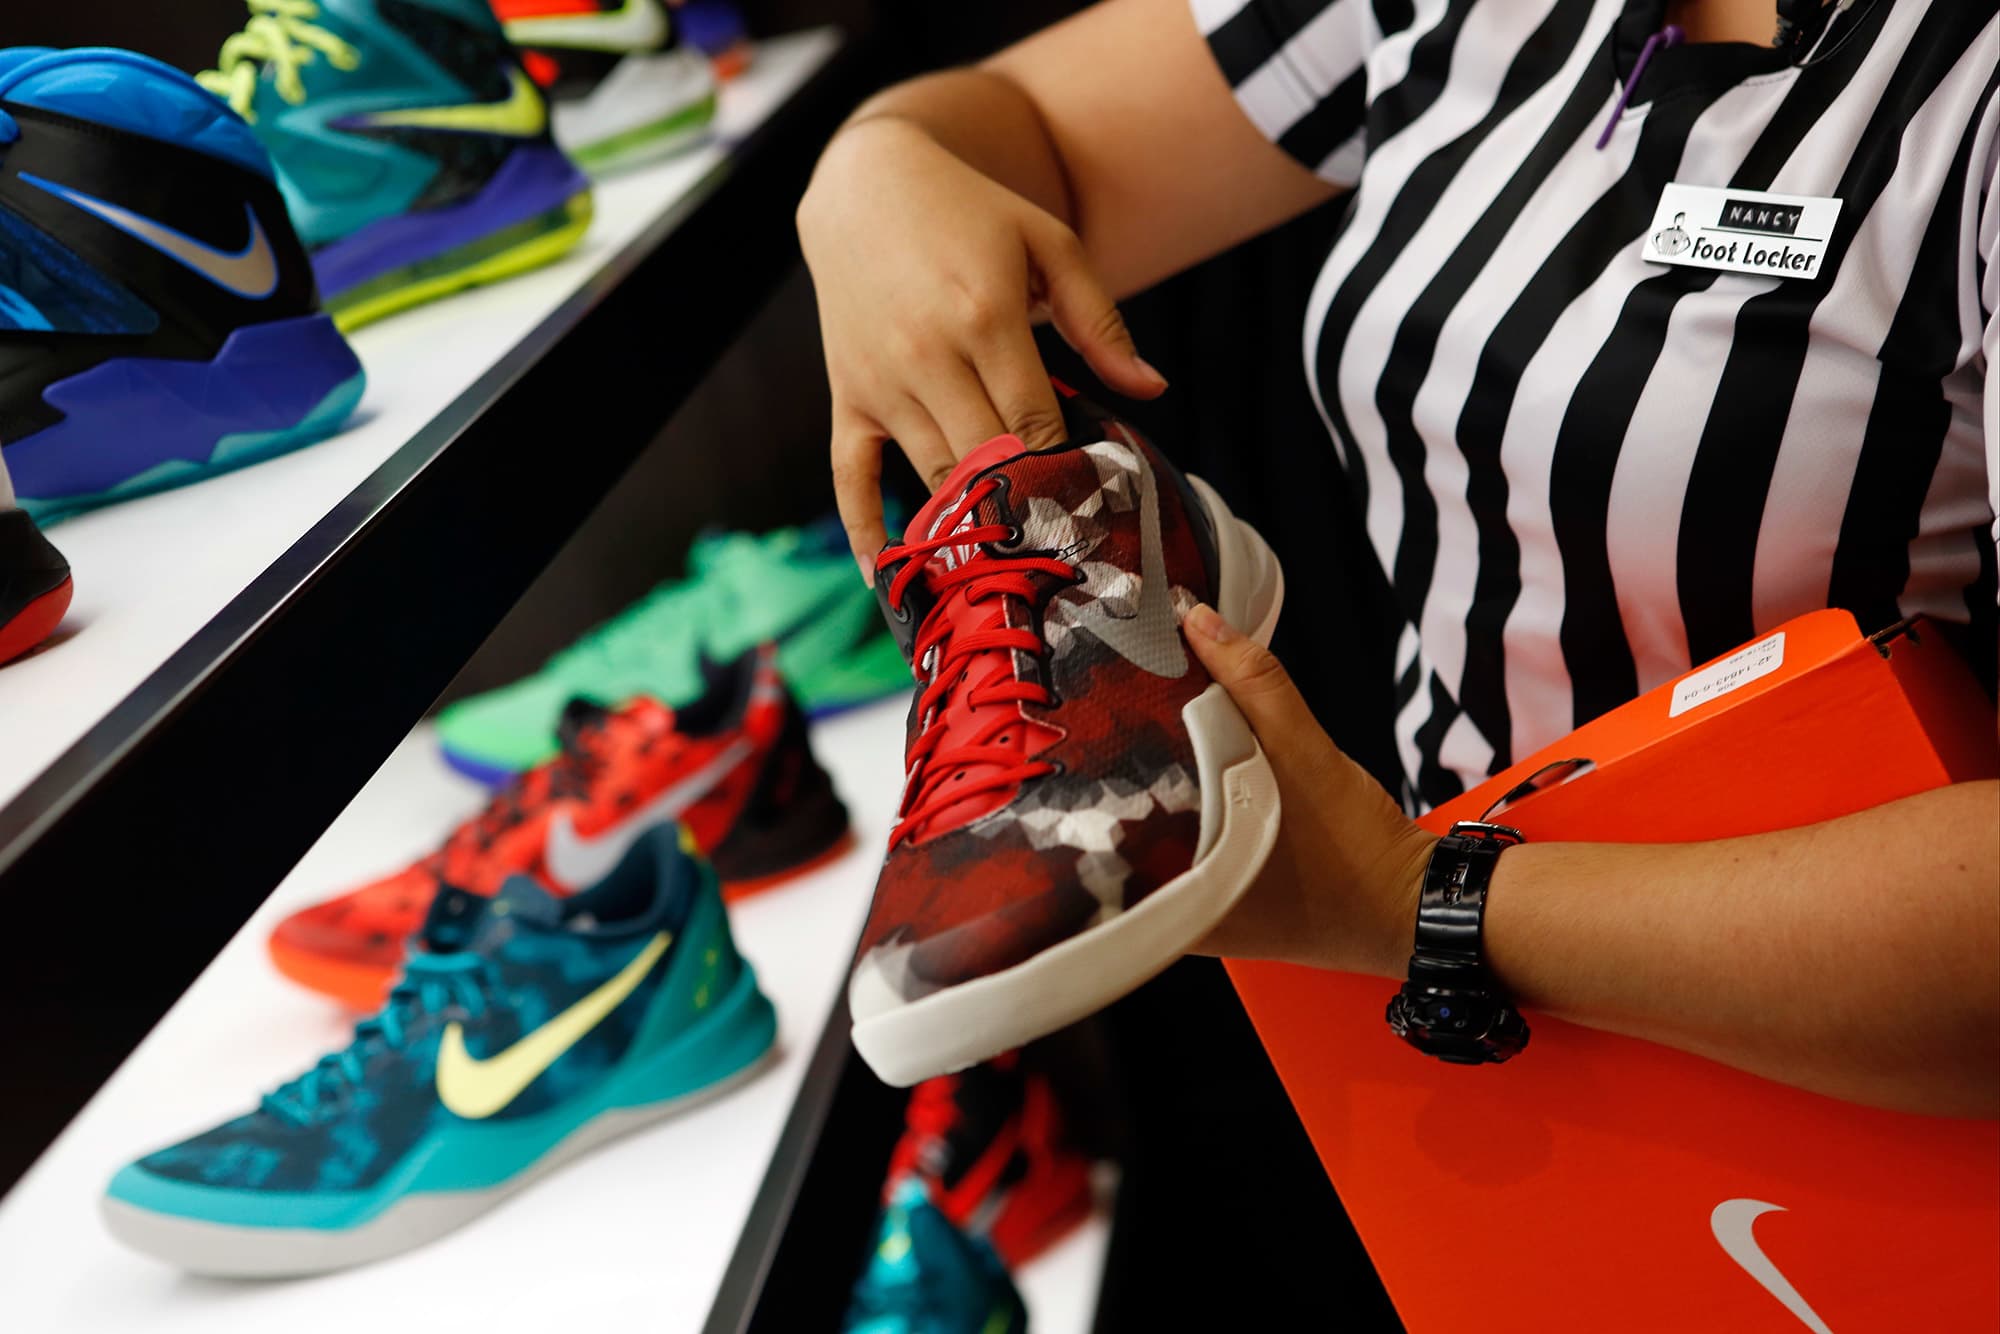 Met andere bands bord Tub Nike expected to win back market share, stock surges 8%